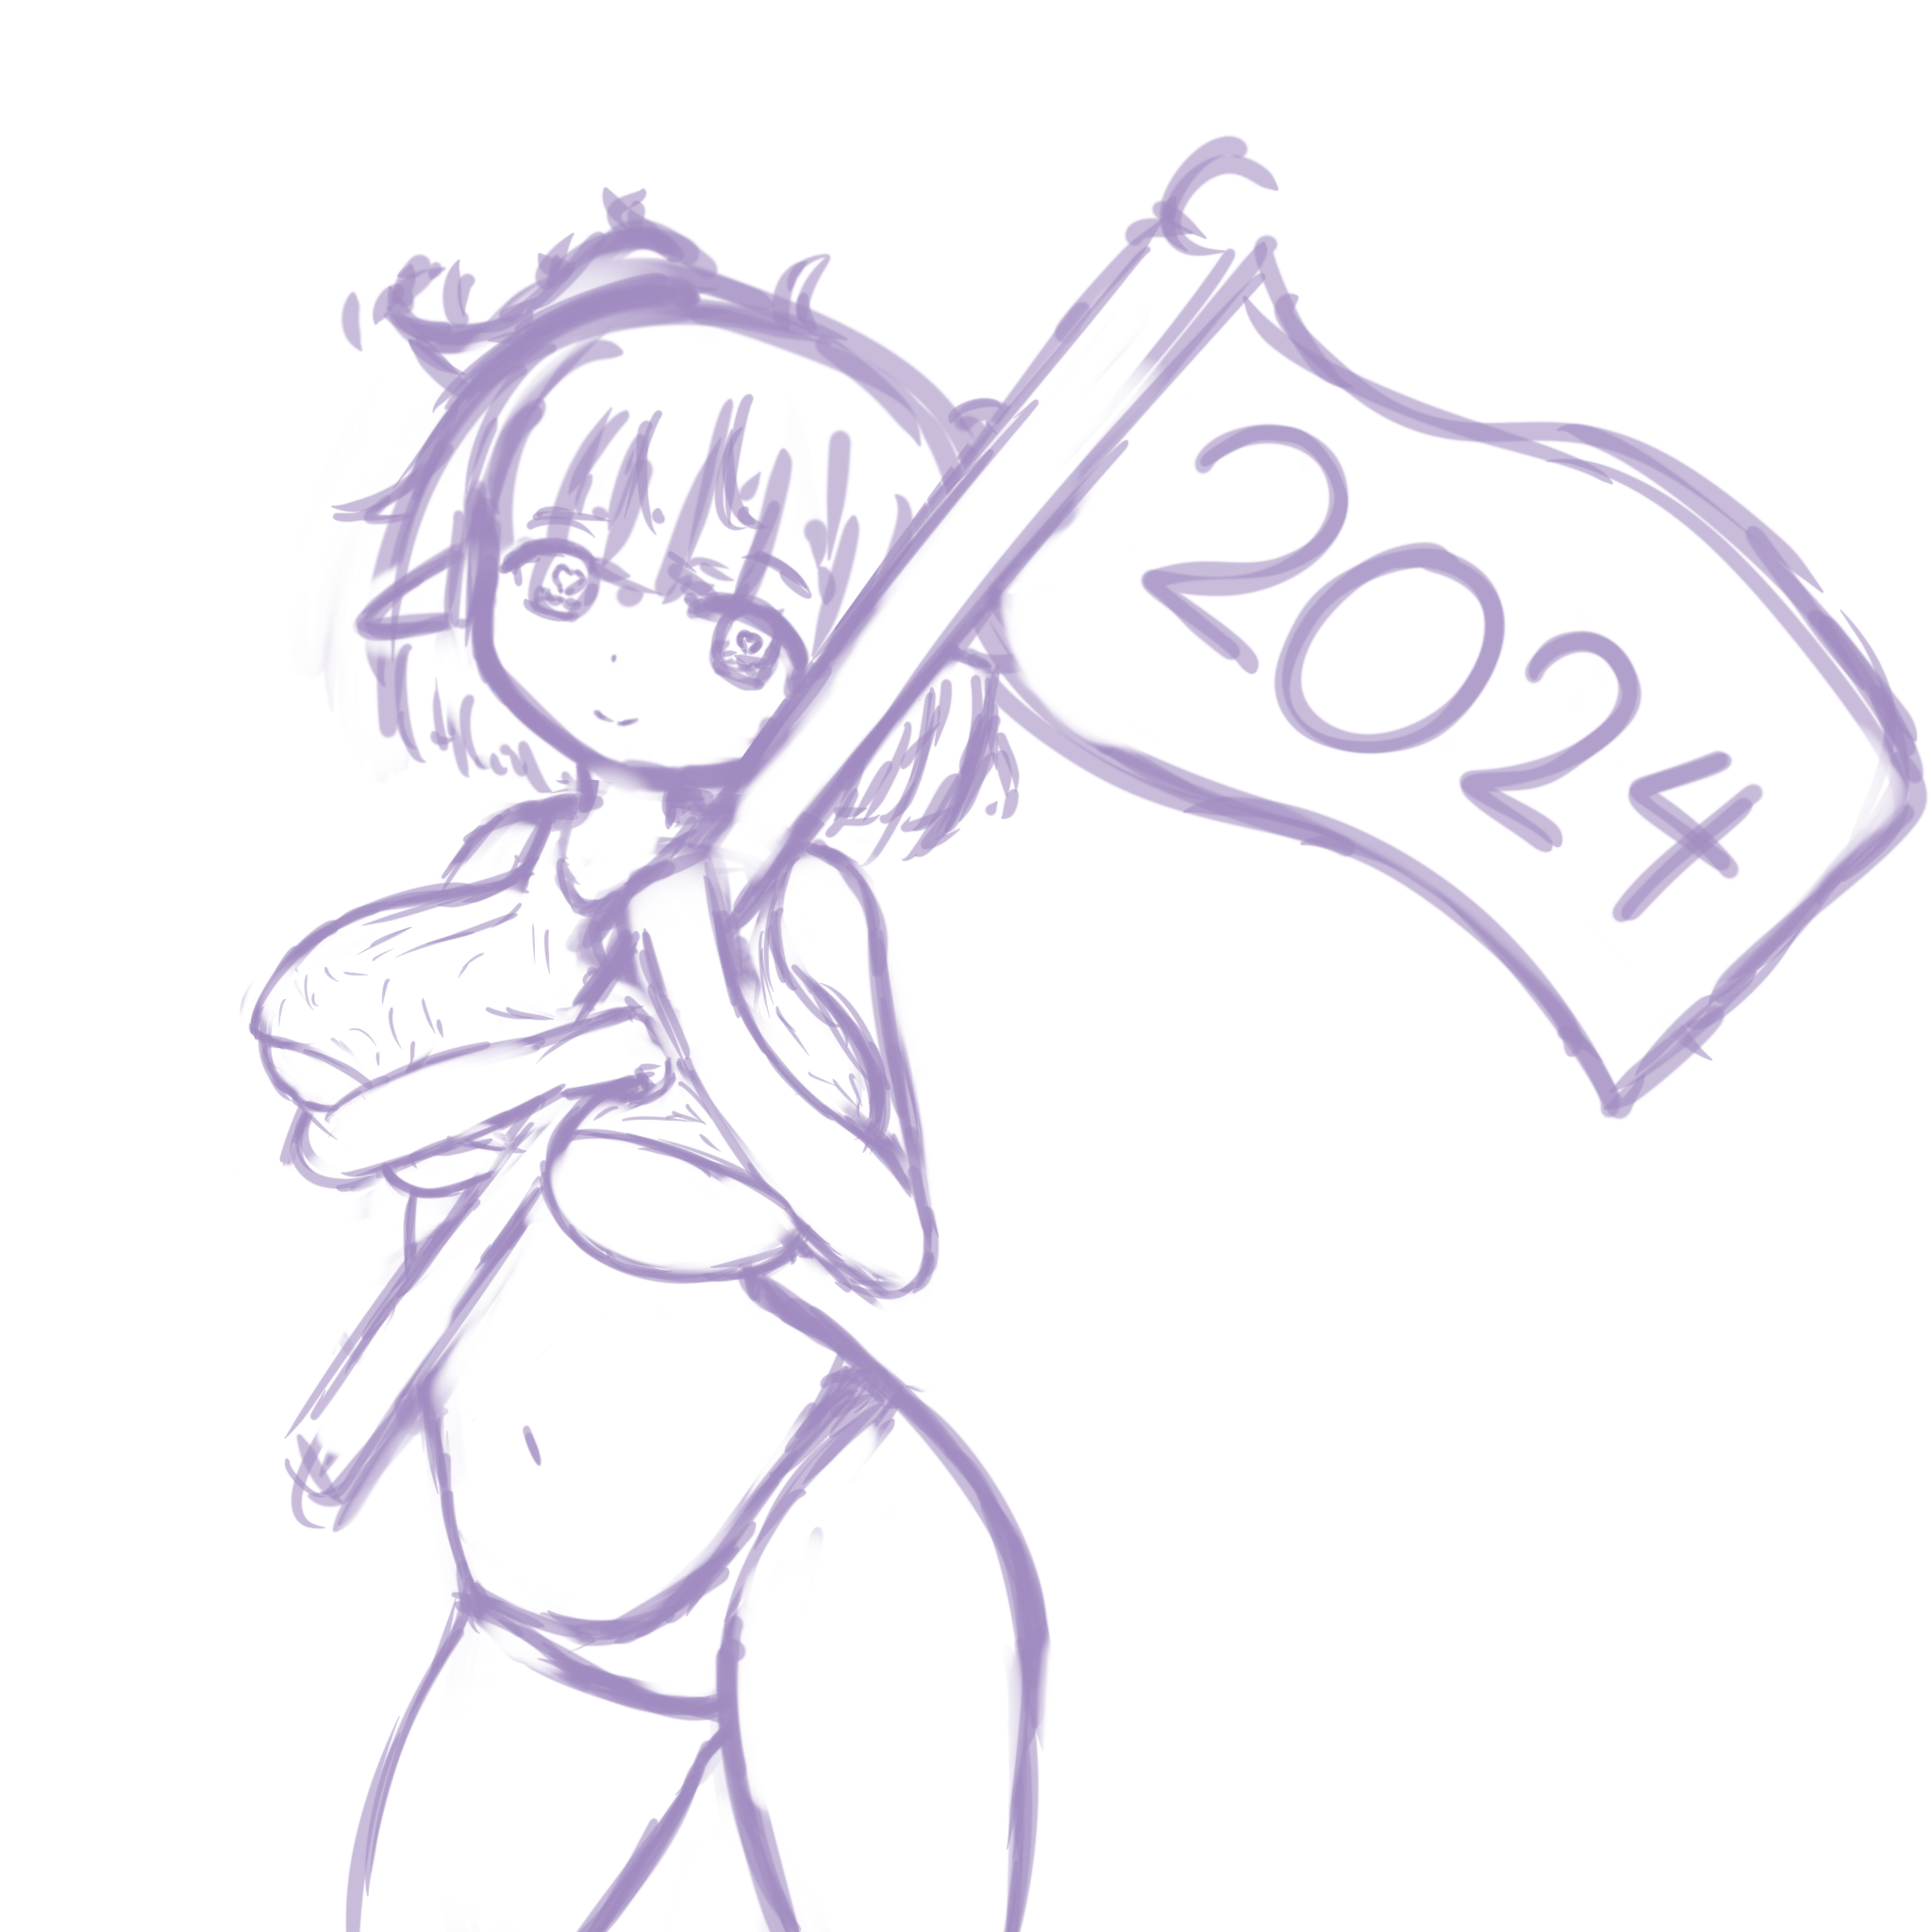 Rue holding a flag that says 2024.